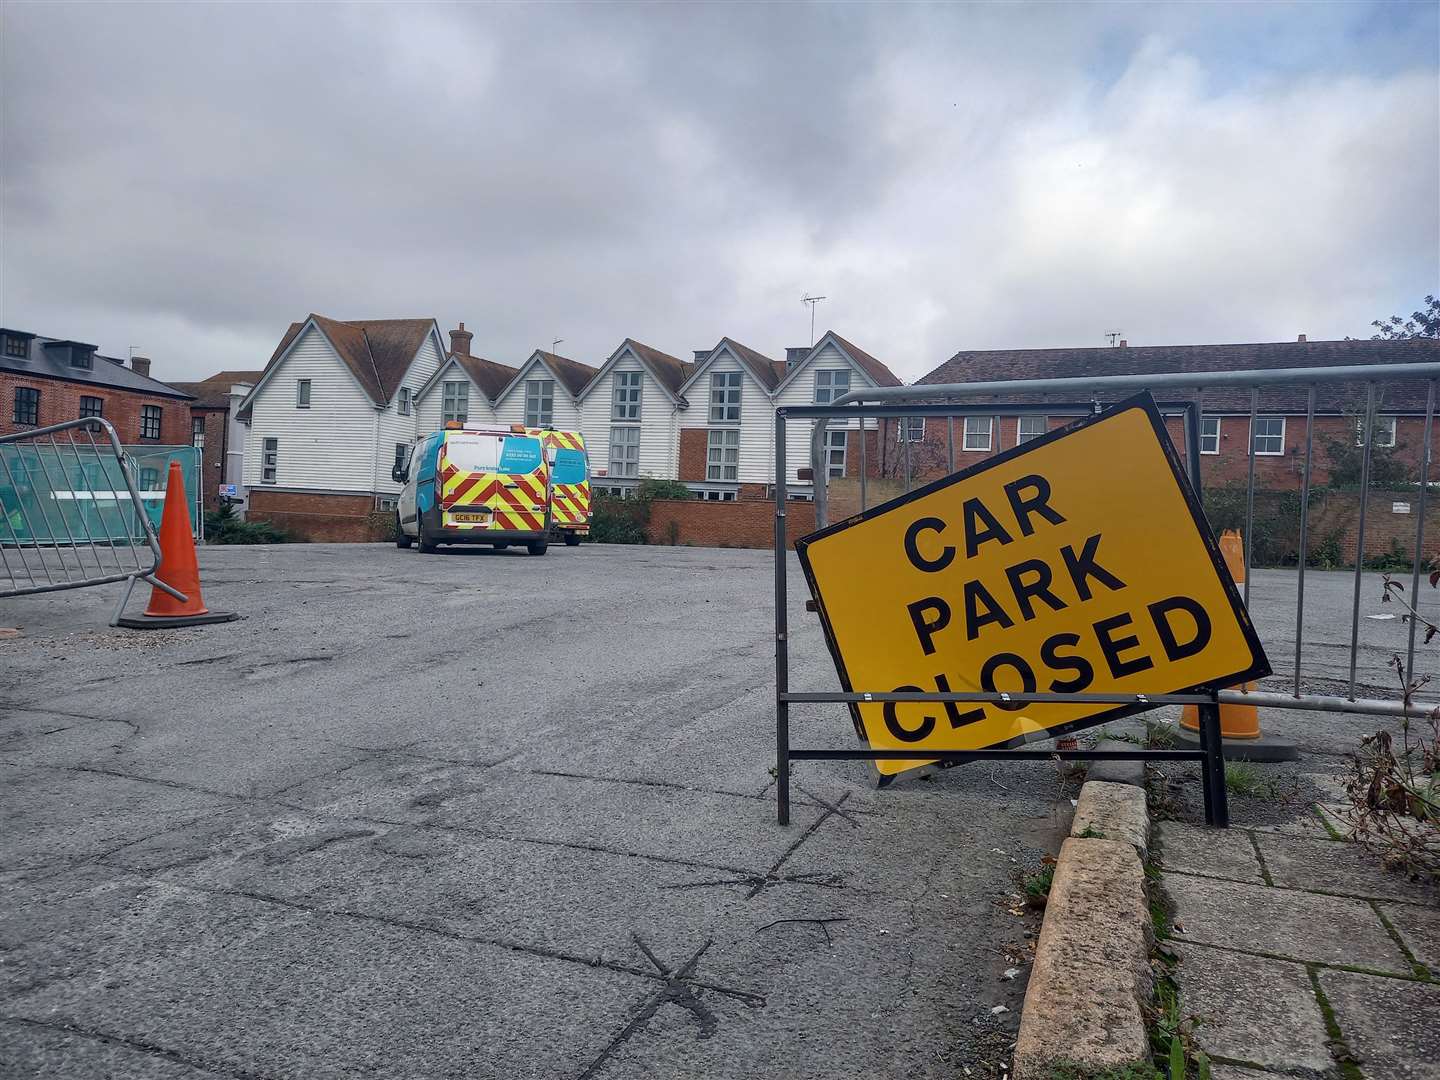 Rosemary Lane car park has been closed since 2020, and is among those now on sale